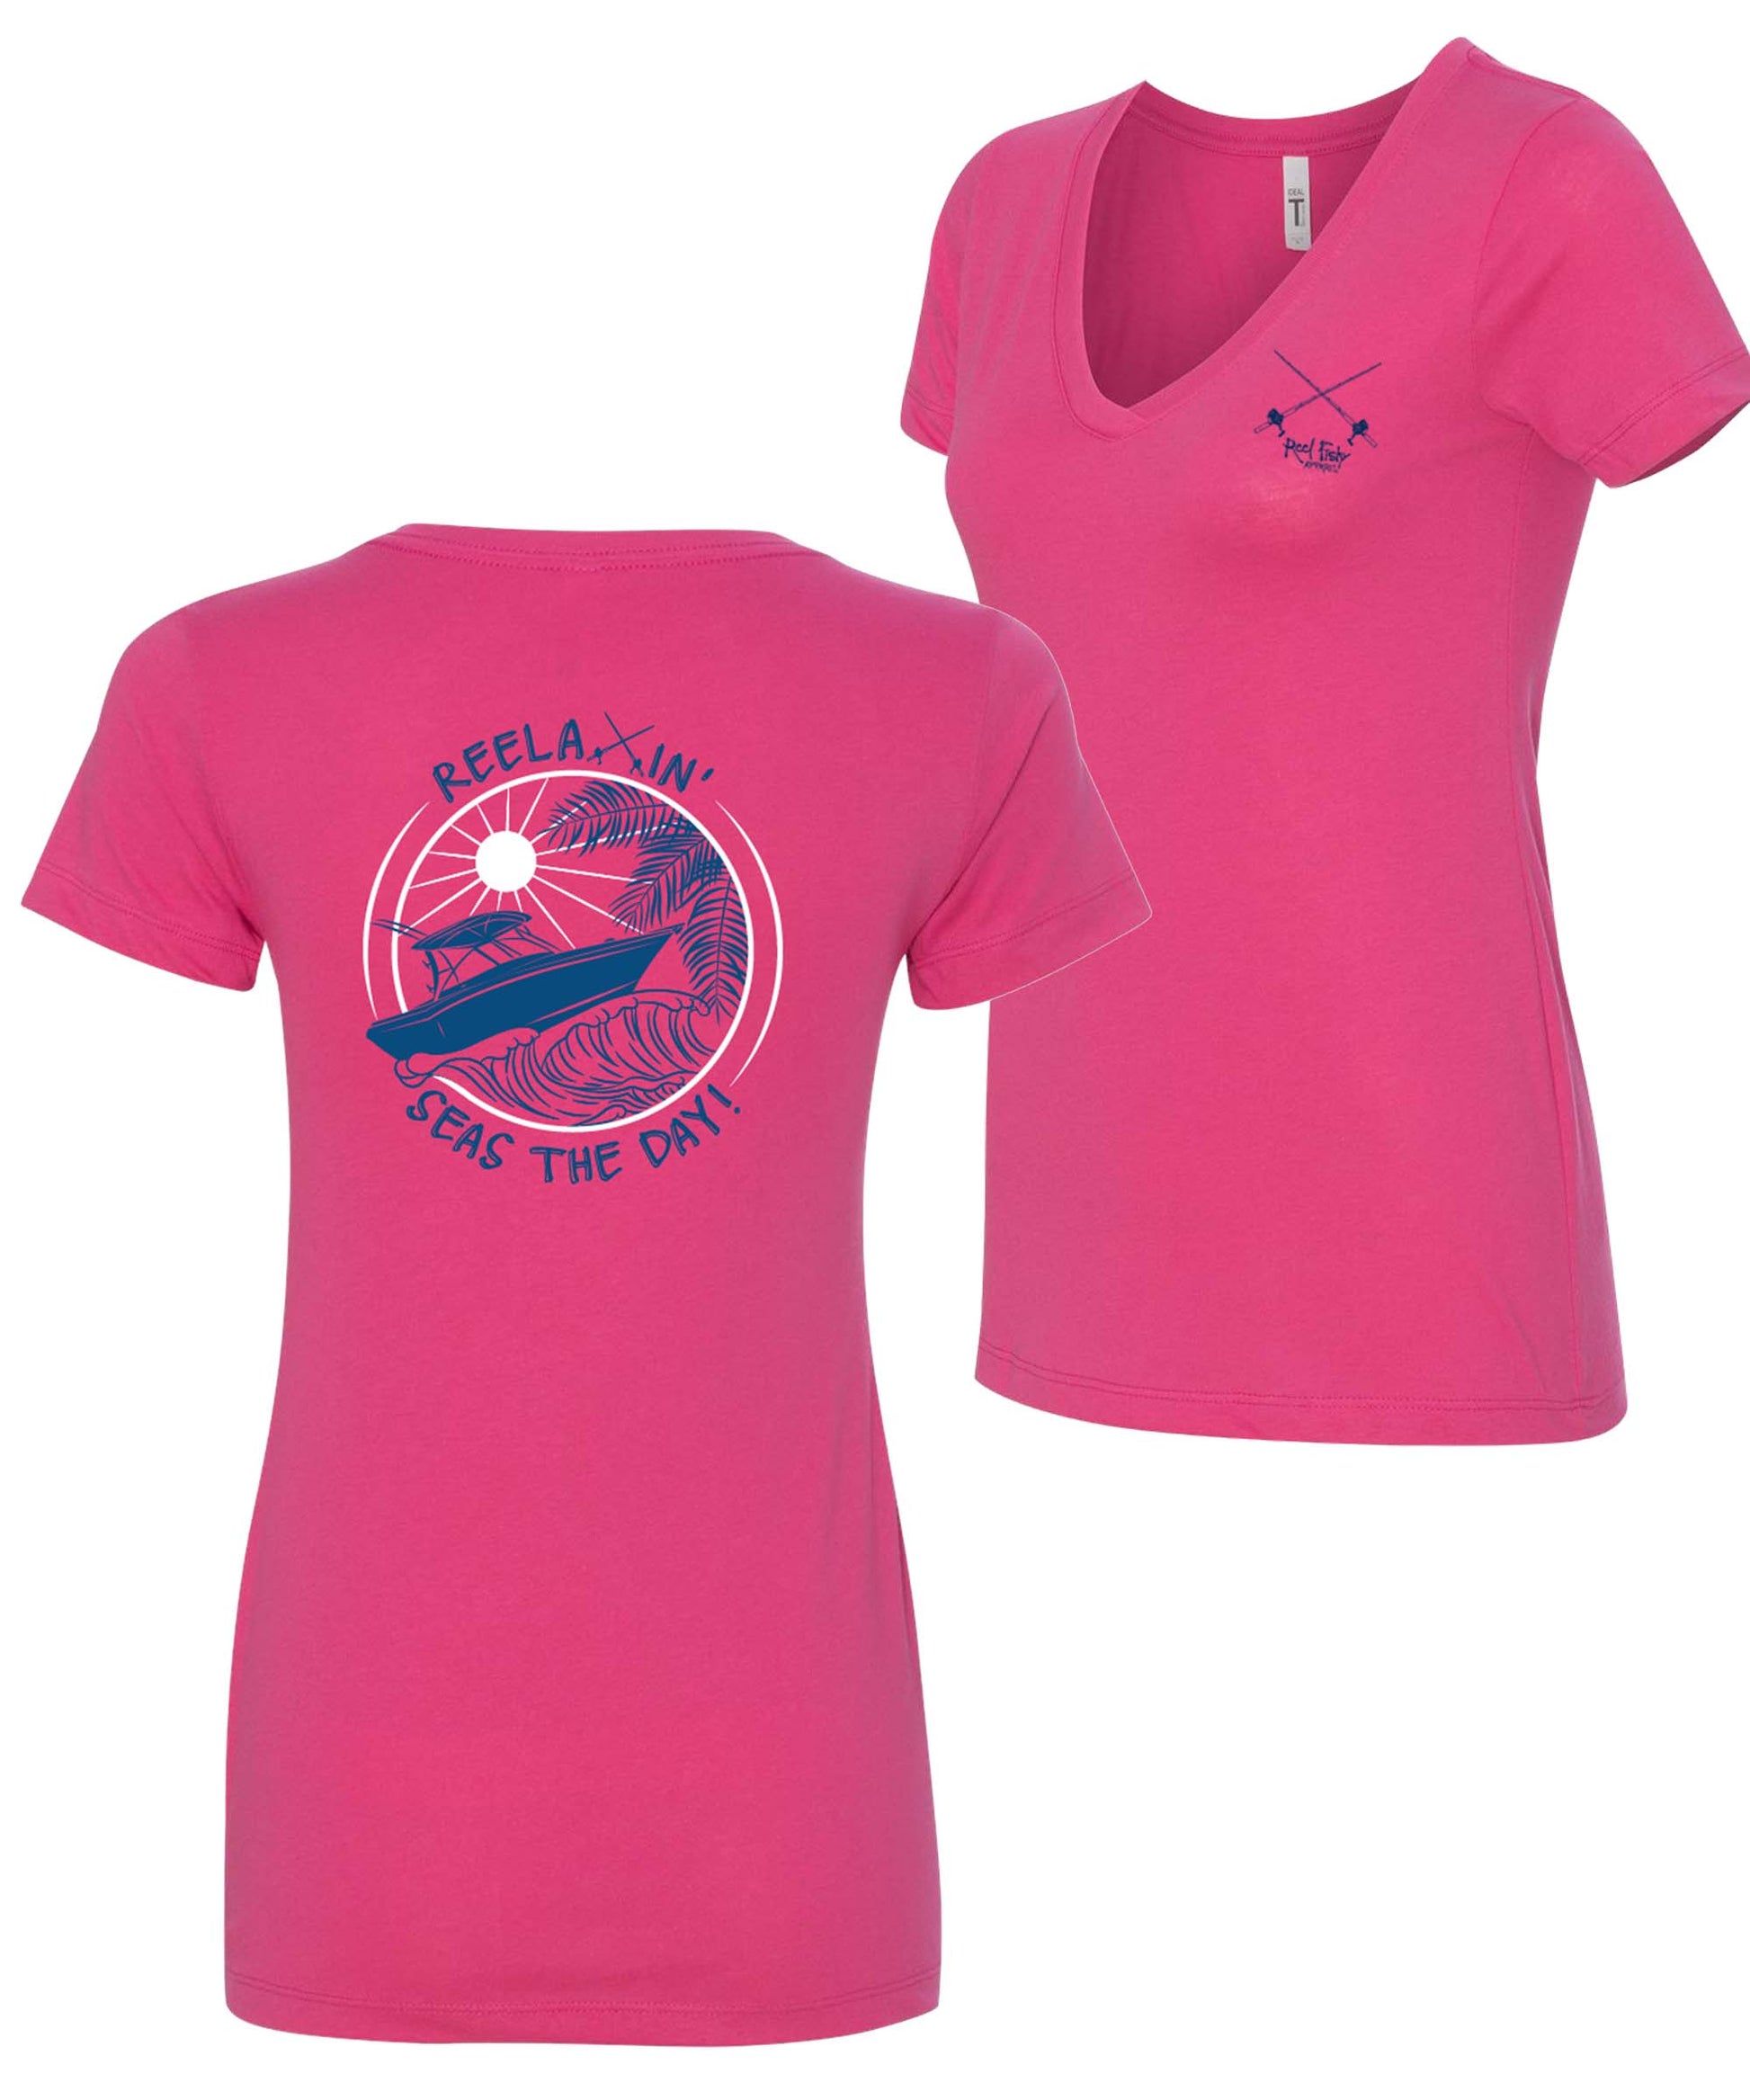 Ladies Reelaxin' - Seas the Day v-neck cotton shirt in Pink Raspberry